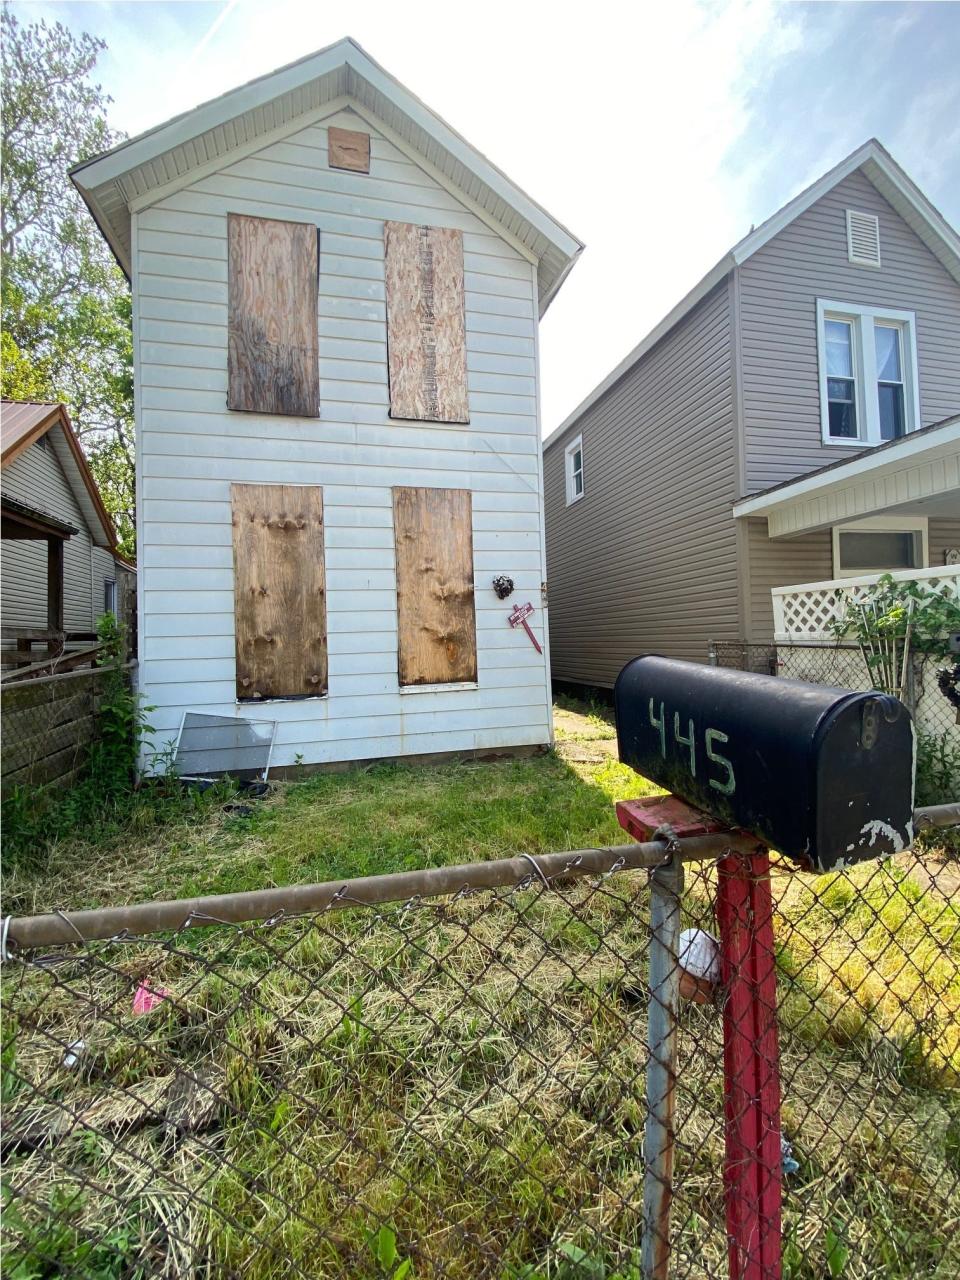 Mikesell Excavating has been contracted for $8,100 to demolish the structure at 445 S. 12th St. through the city's Code Enforcement and Unsafe Building Commission process.